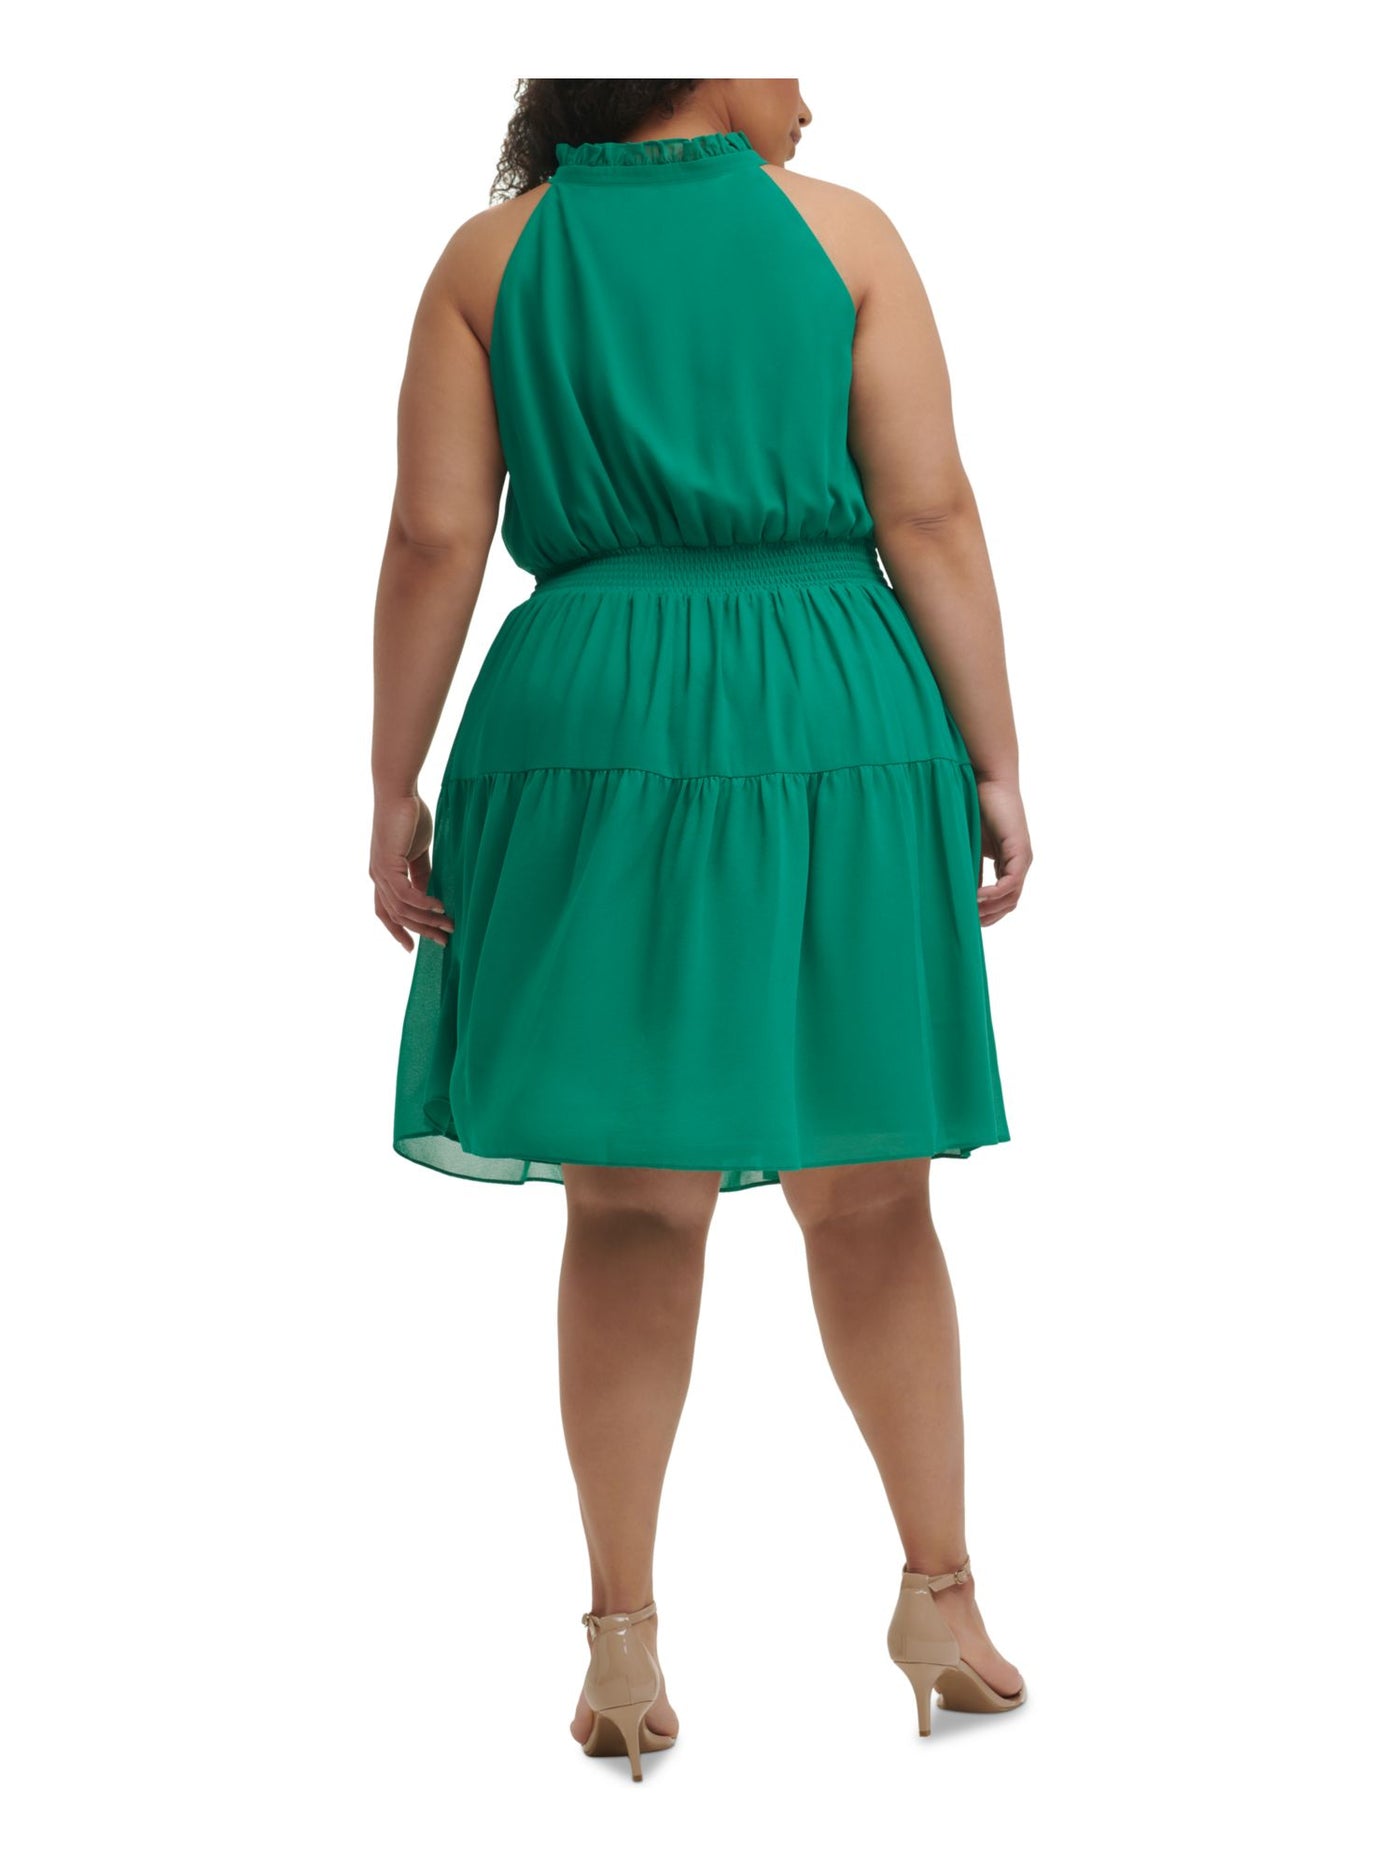 VINCE CAMUTO Womens Green Stretch Ruffled Smocked Sleeveless Tie Neck Above The Knee Party Fit + Flare Dress Plus 16W